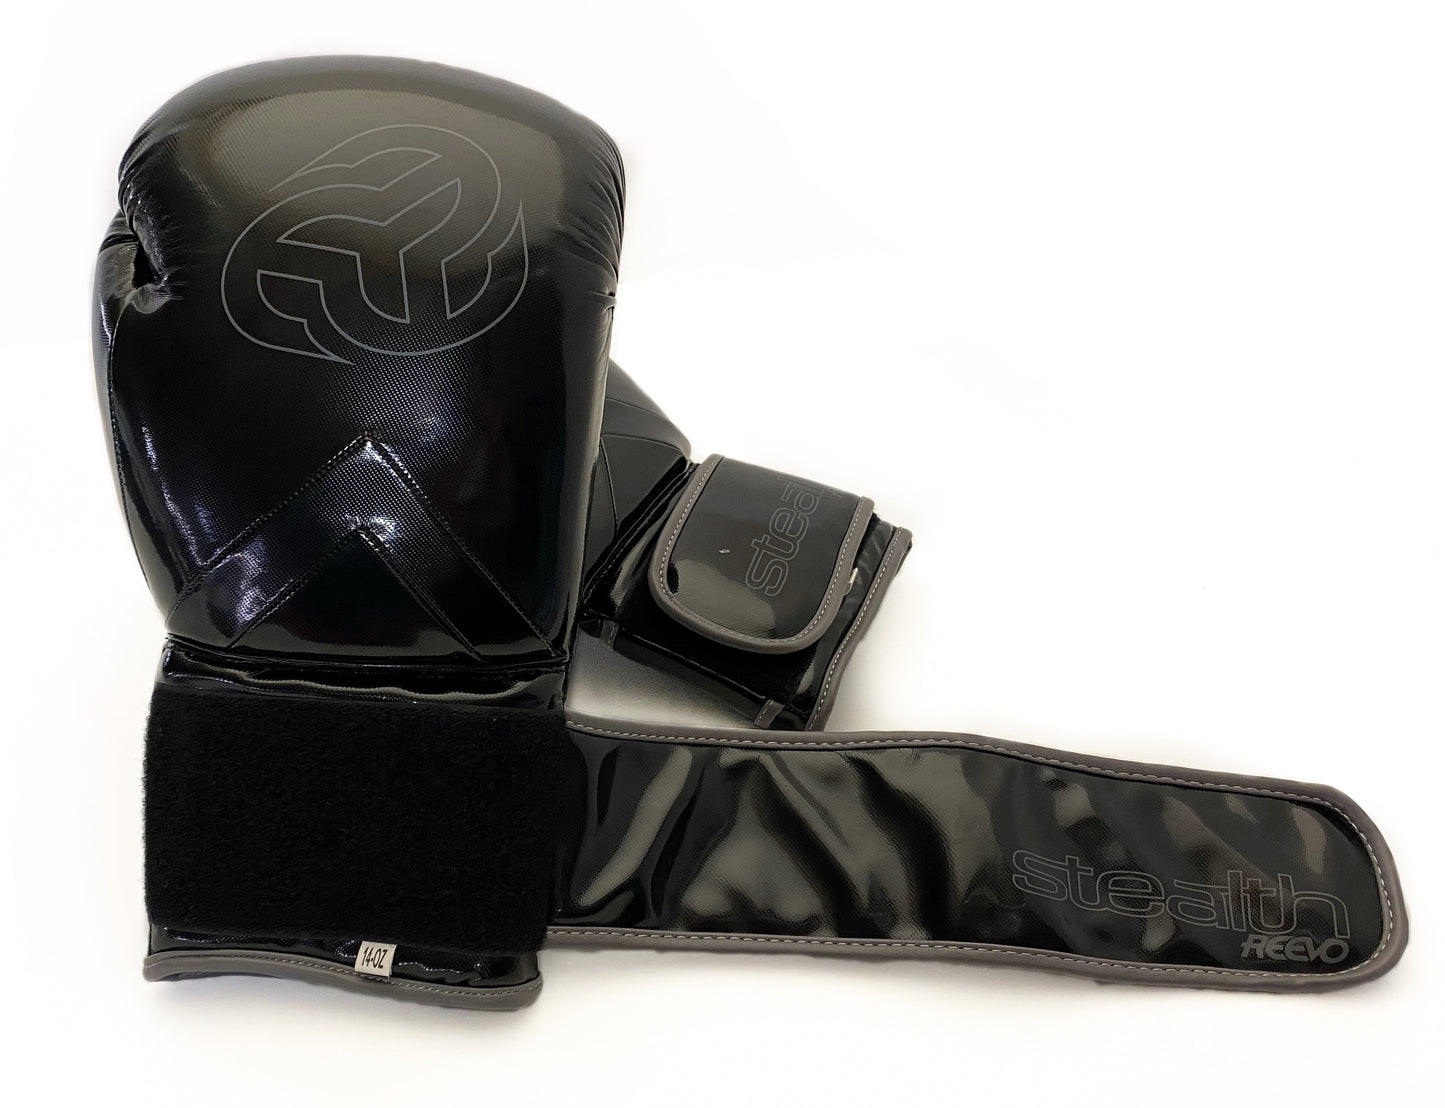 Reevo Stealth Boxing Gloves